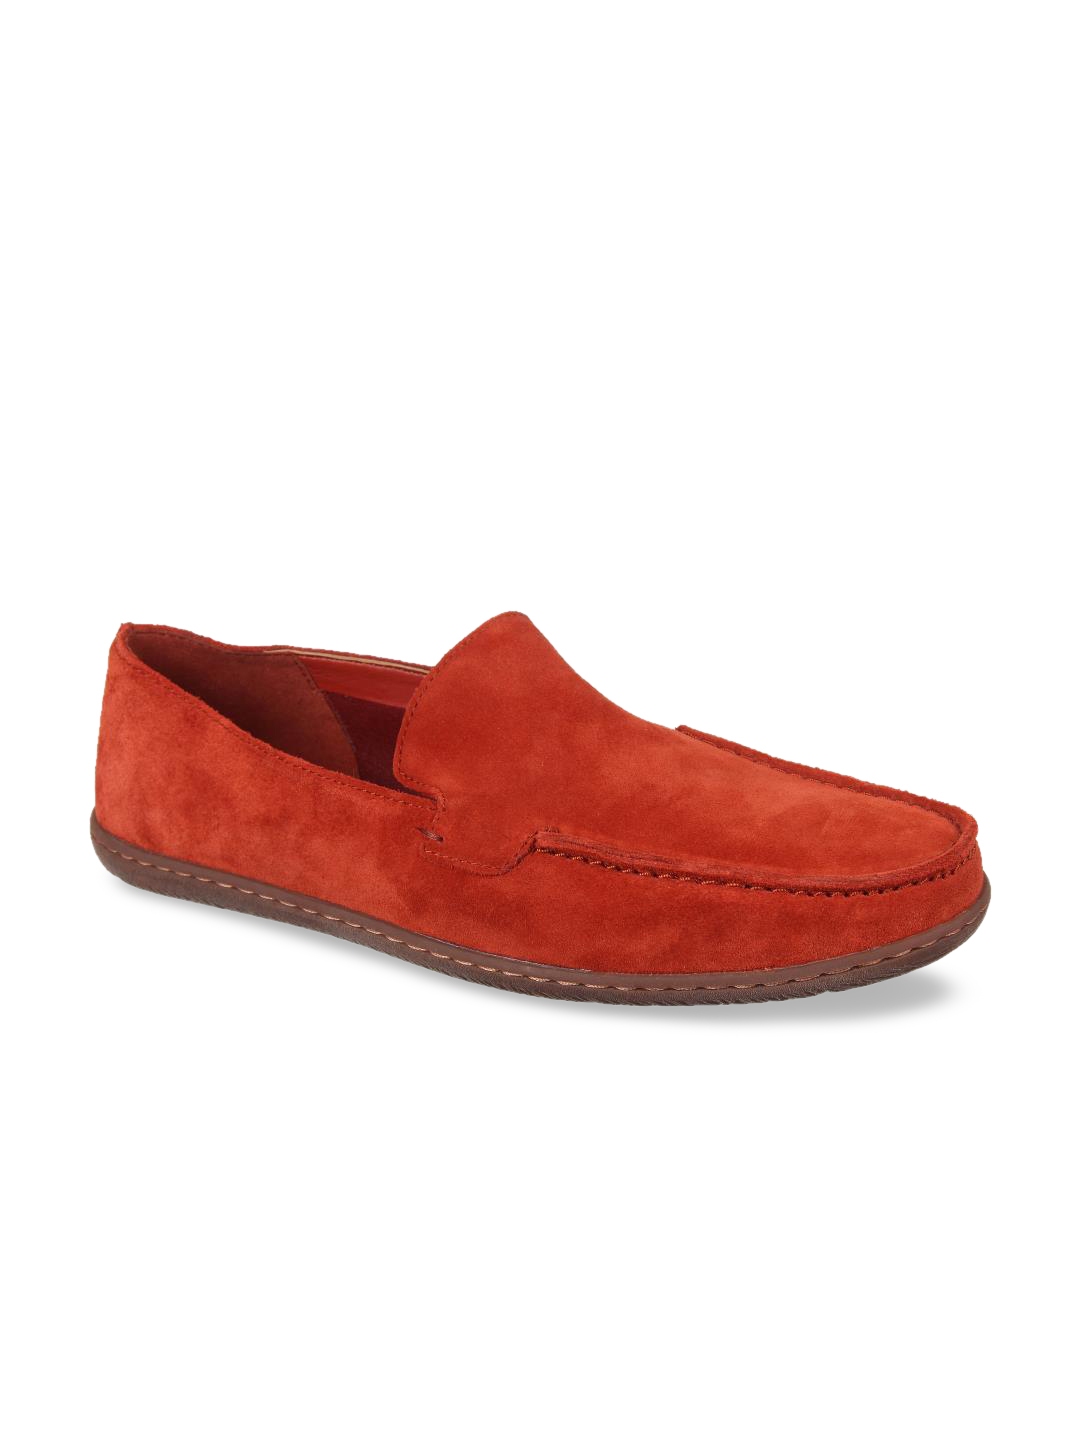 clarks womens shoes jcpenney